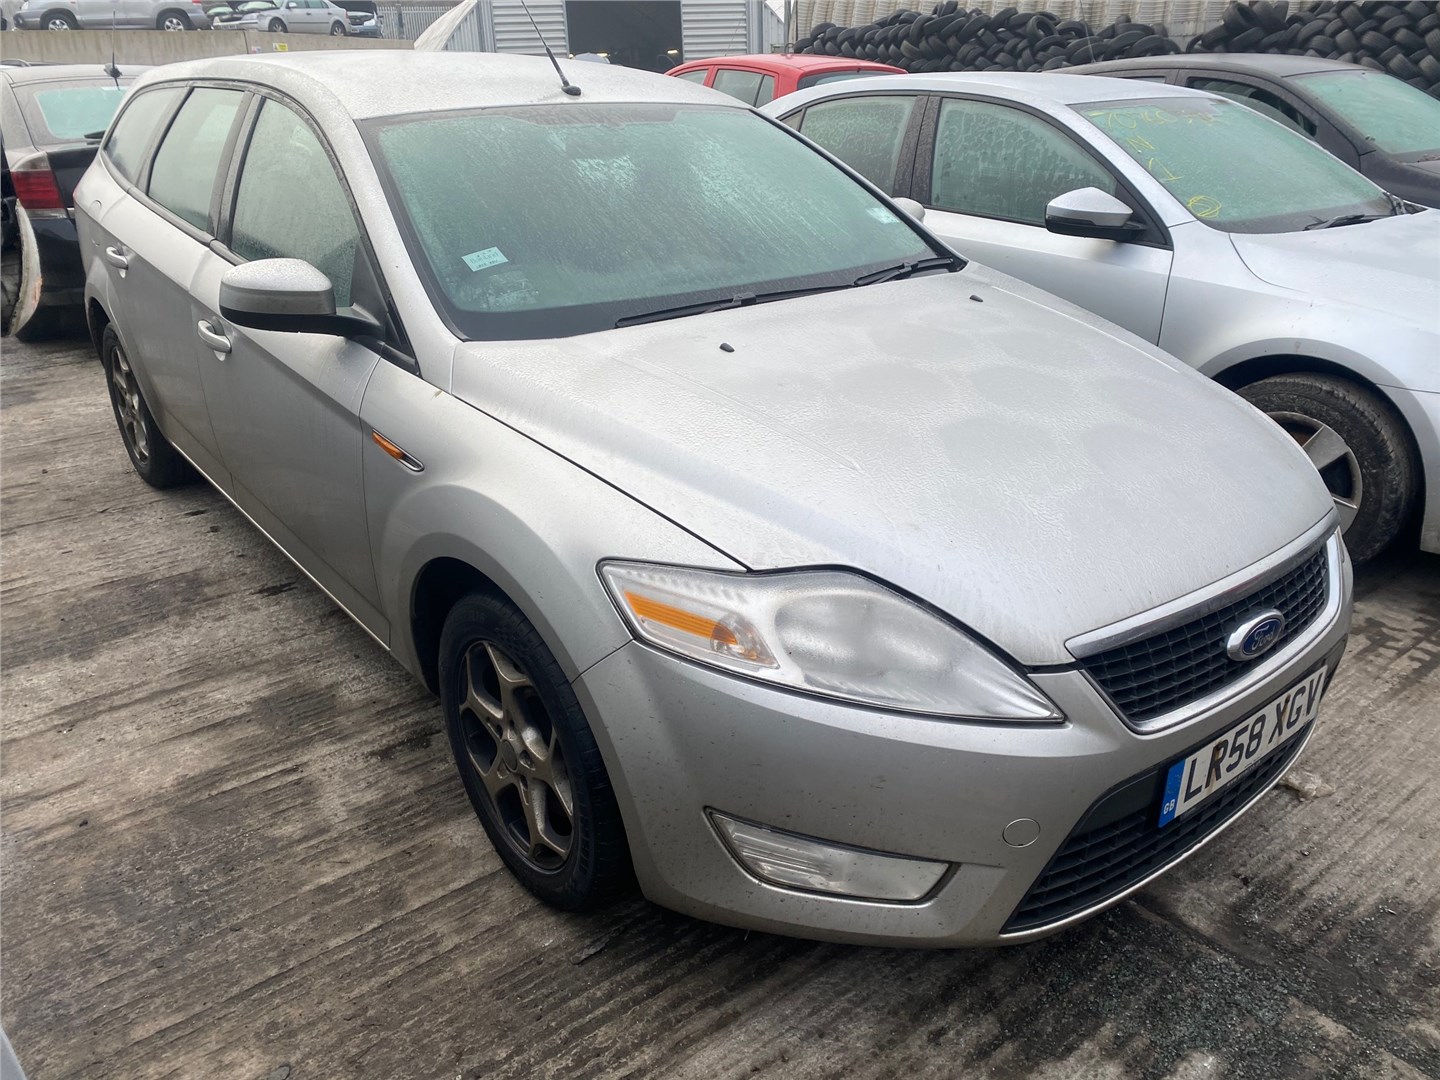 6G916K683A Патрубок интеркулера Ford Mondeo 4 2007-2015 2008